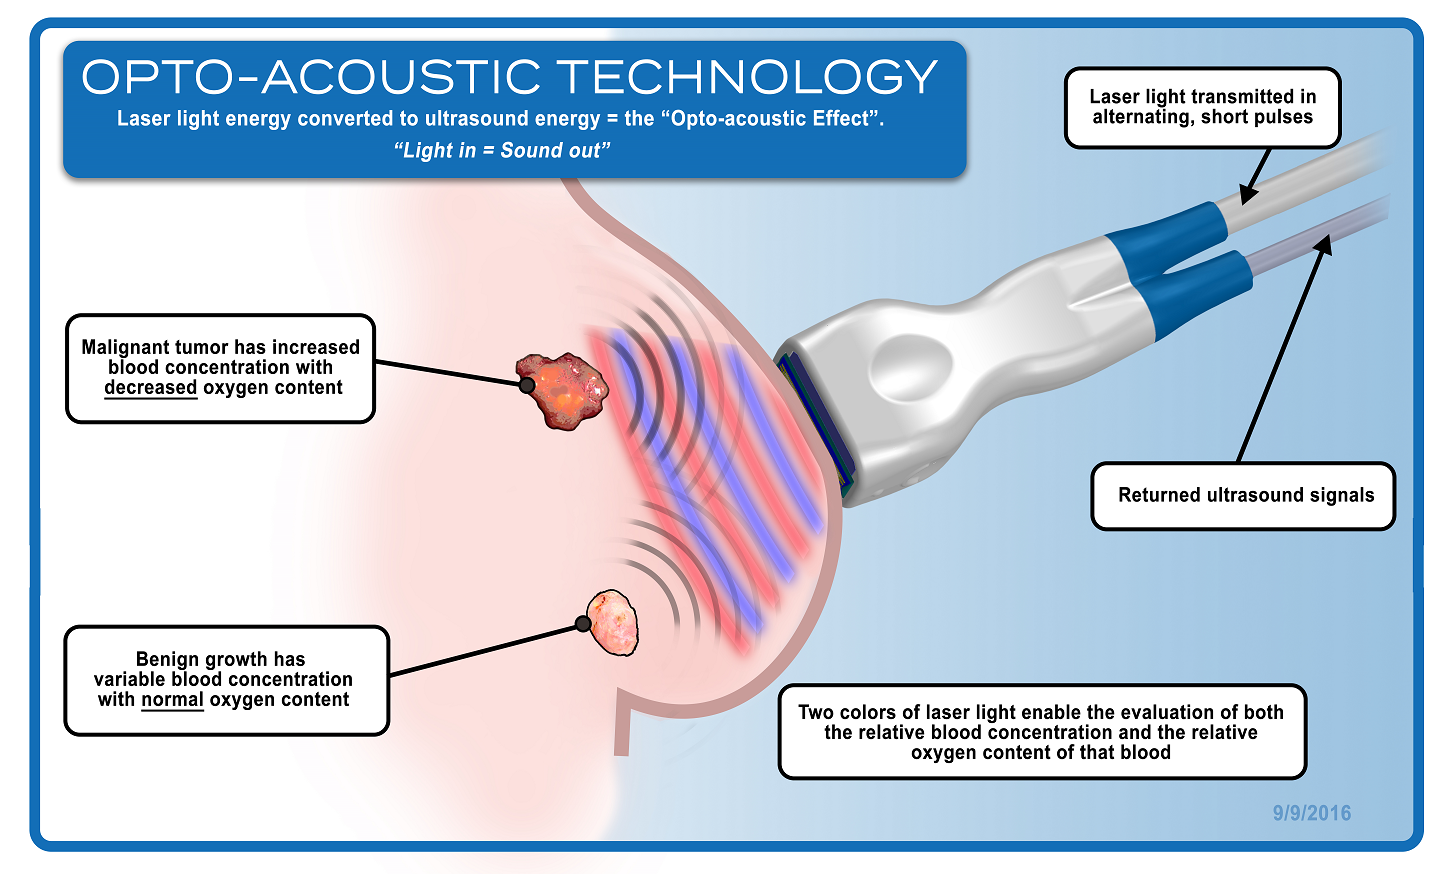 Opto-Acoustic Technology